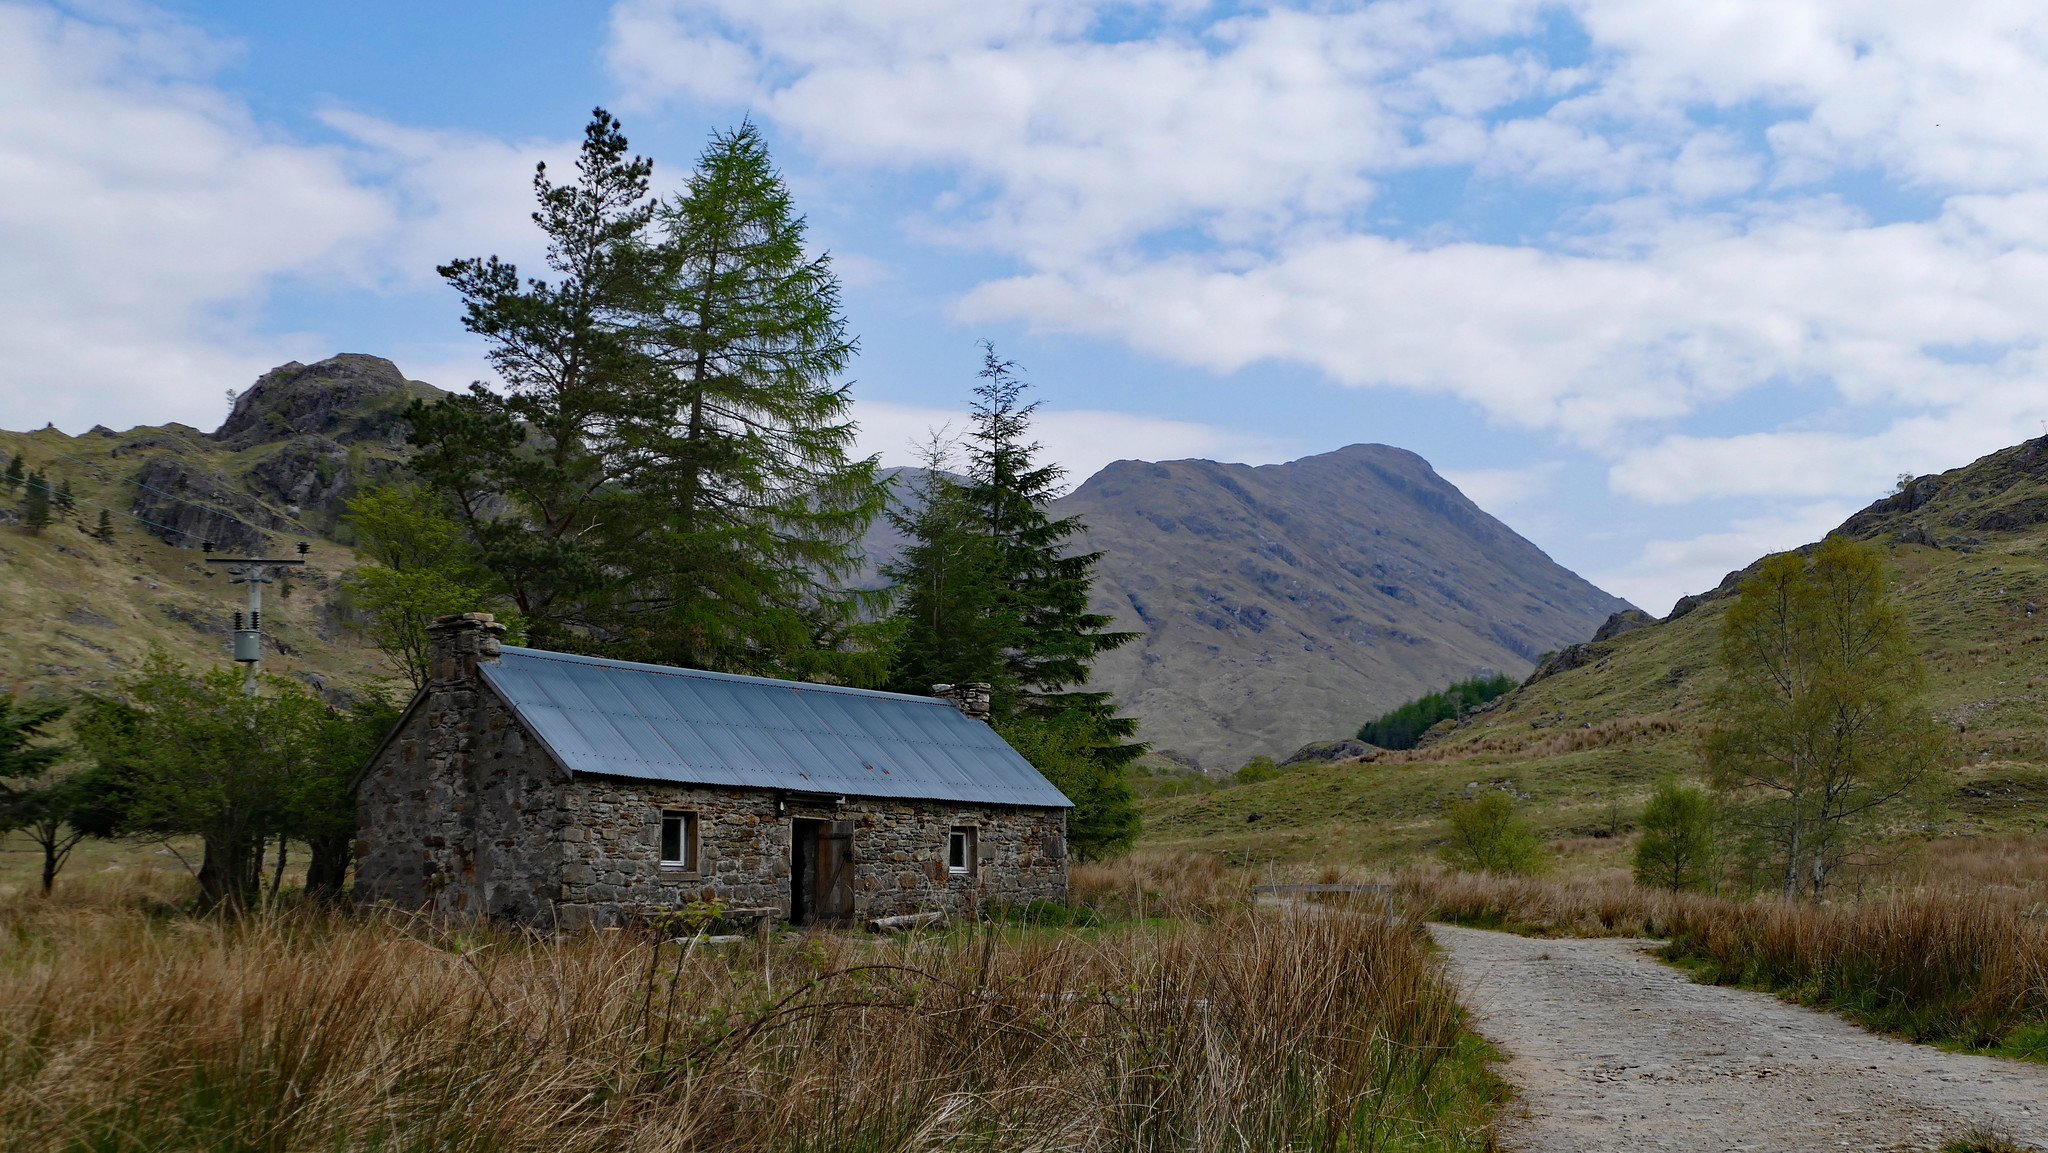 A bothy nestled under some large evergreen trees on the side of a stony track going towards the Scottish mountains in the background.